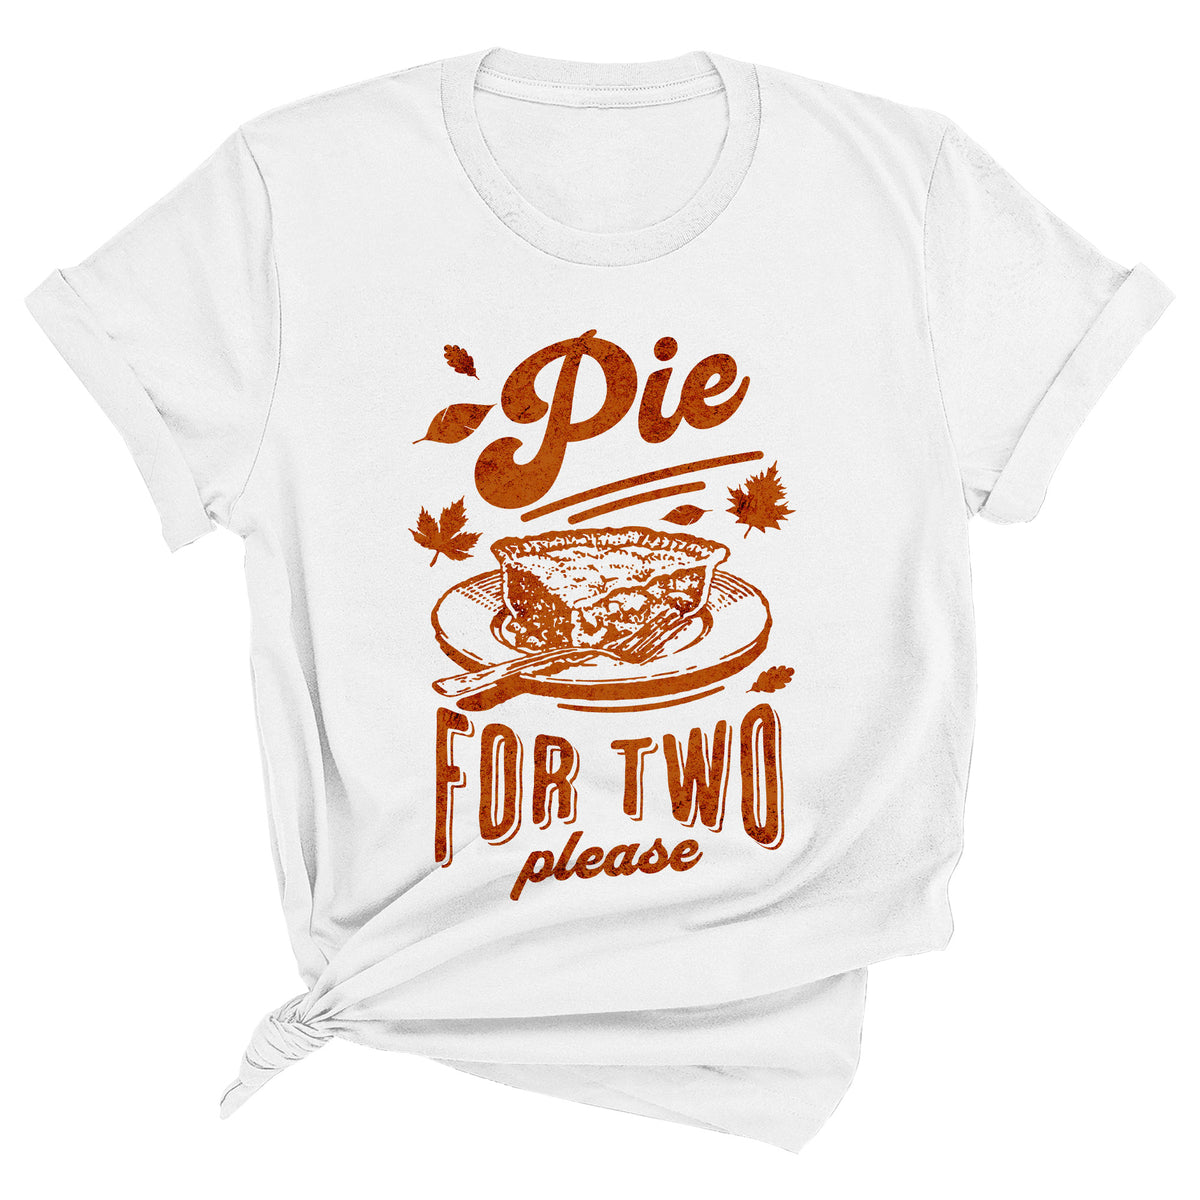 Pie for Two Please Unisex T-Shirt